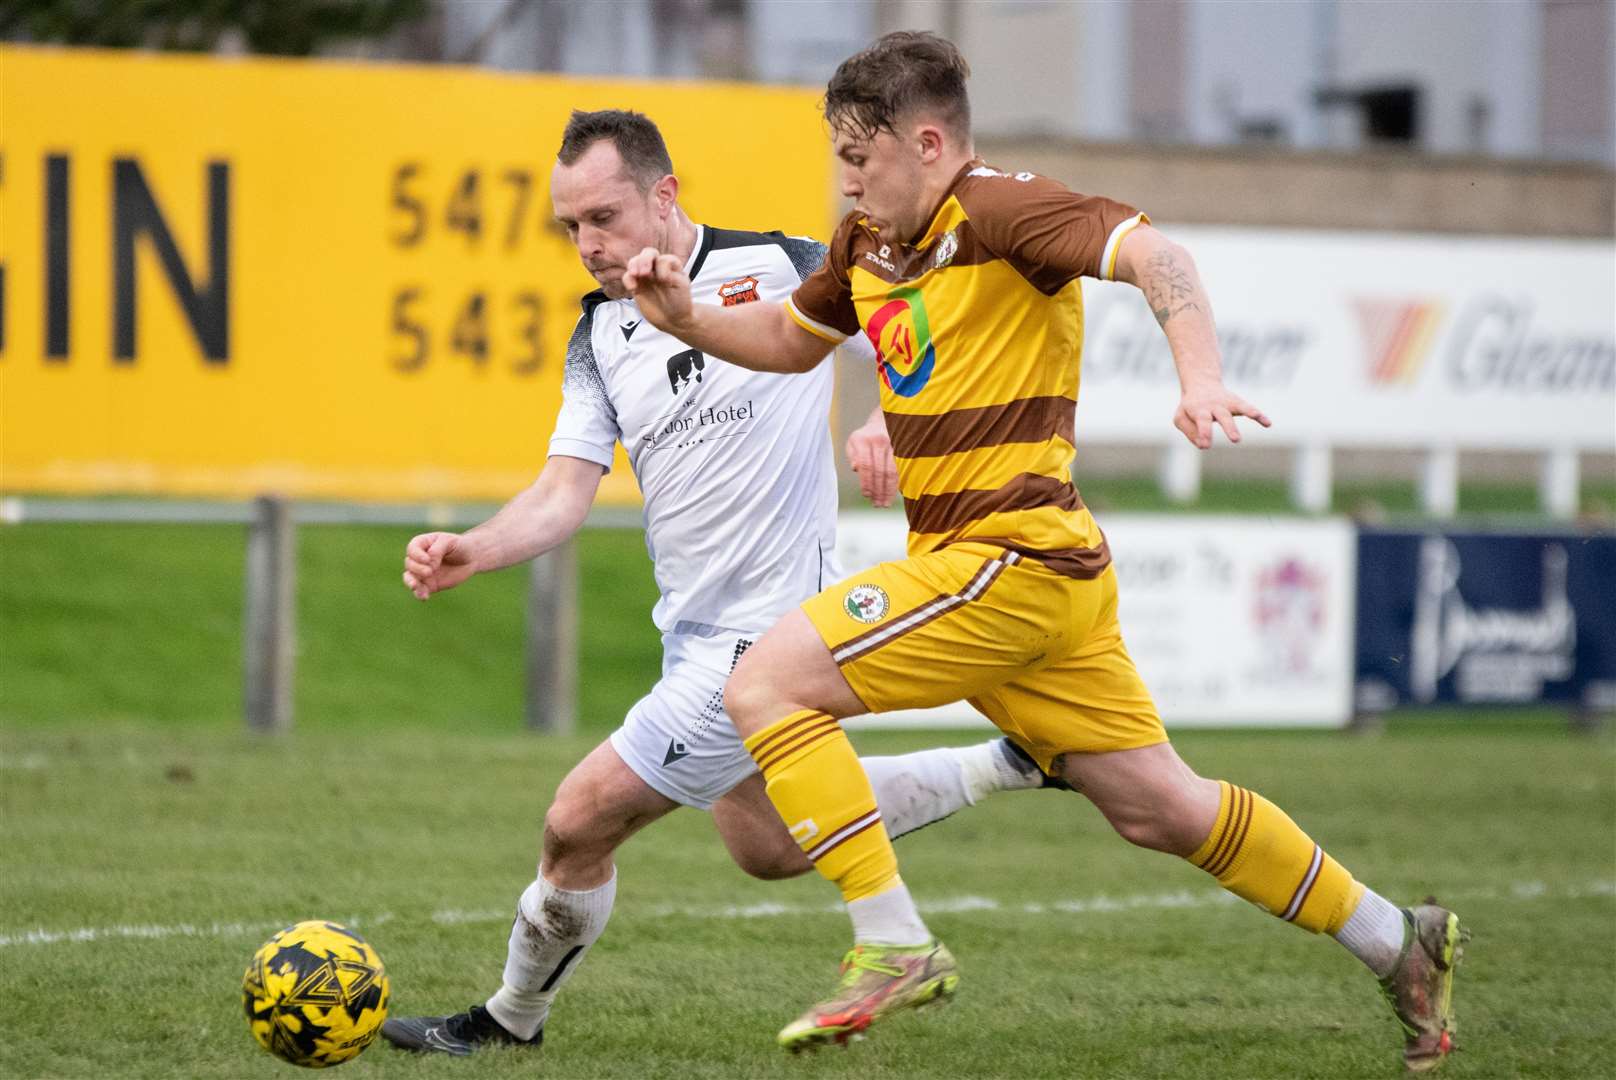 Forres forward Shaun Morrison and Rothes centre back Charlie MacDonald were the goal scorers in the draw. Forres Mechanics FC (0) vs Rothes FC (1) - Highland Football League 23/24 - Mosset Park, Forres 25/11/2023...Picture: Daniel Forsyth..